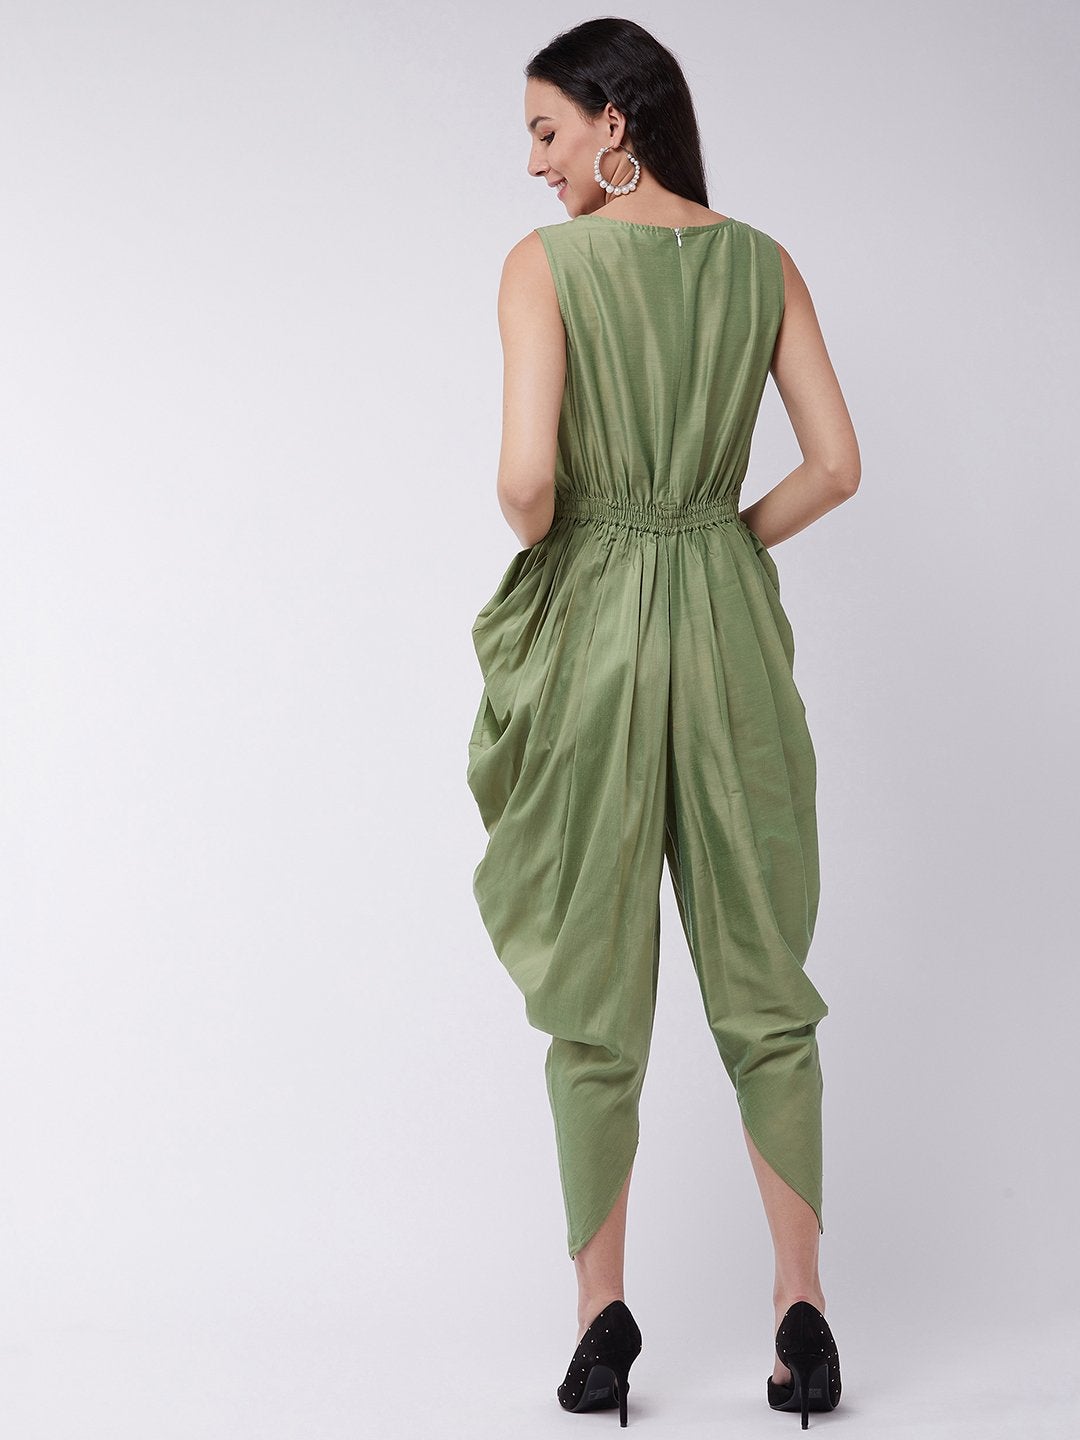 Women's Embroidered Cowl Jumpsuit - Pannkh